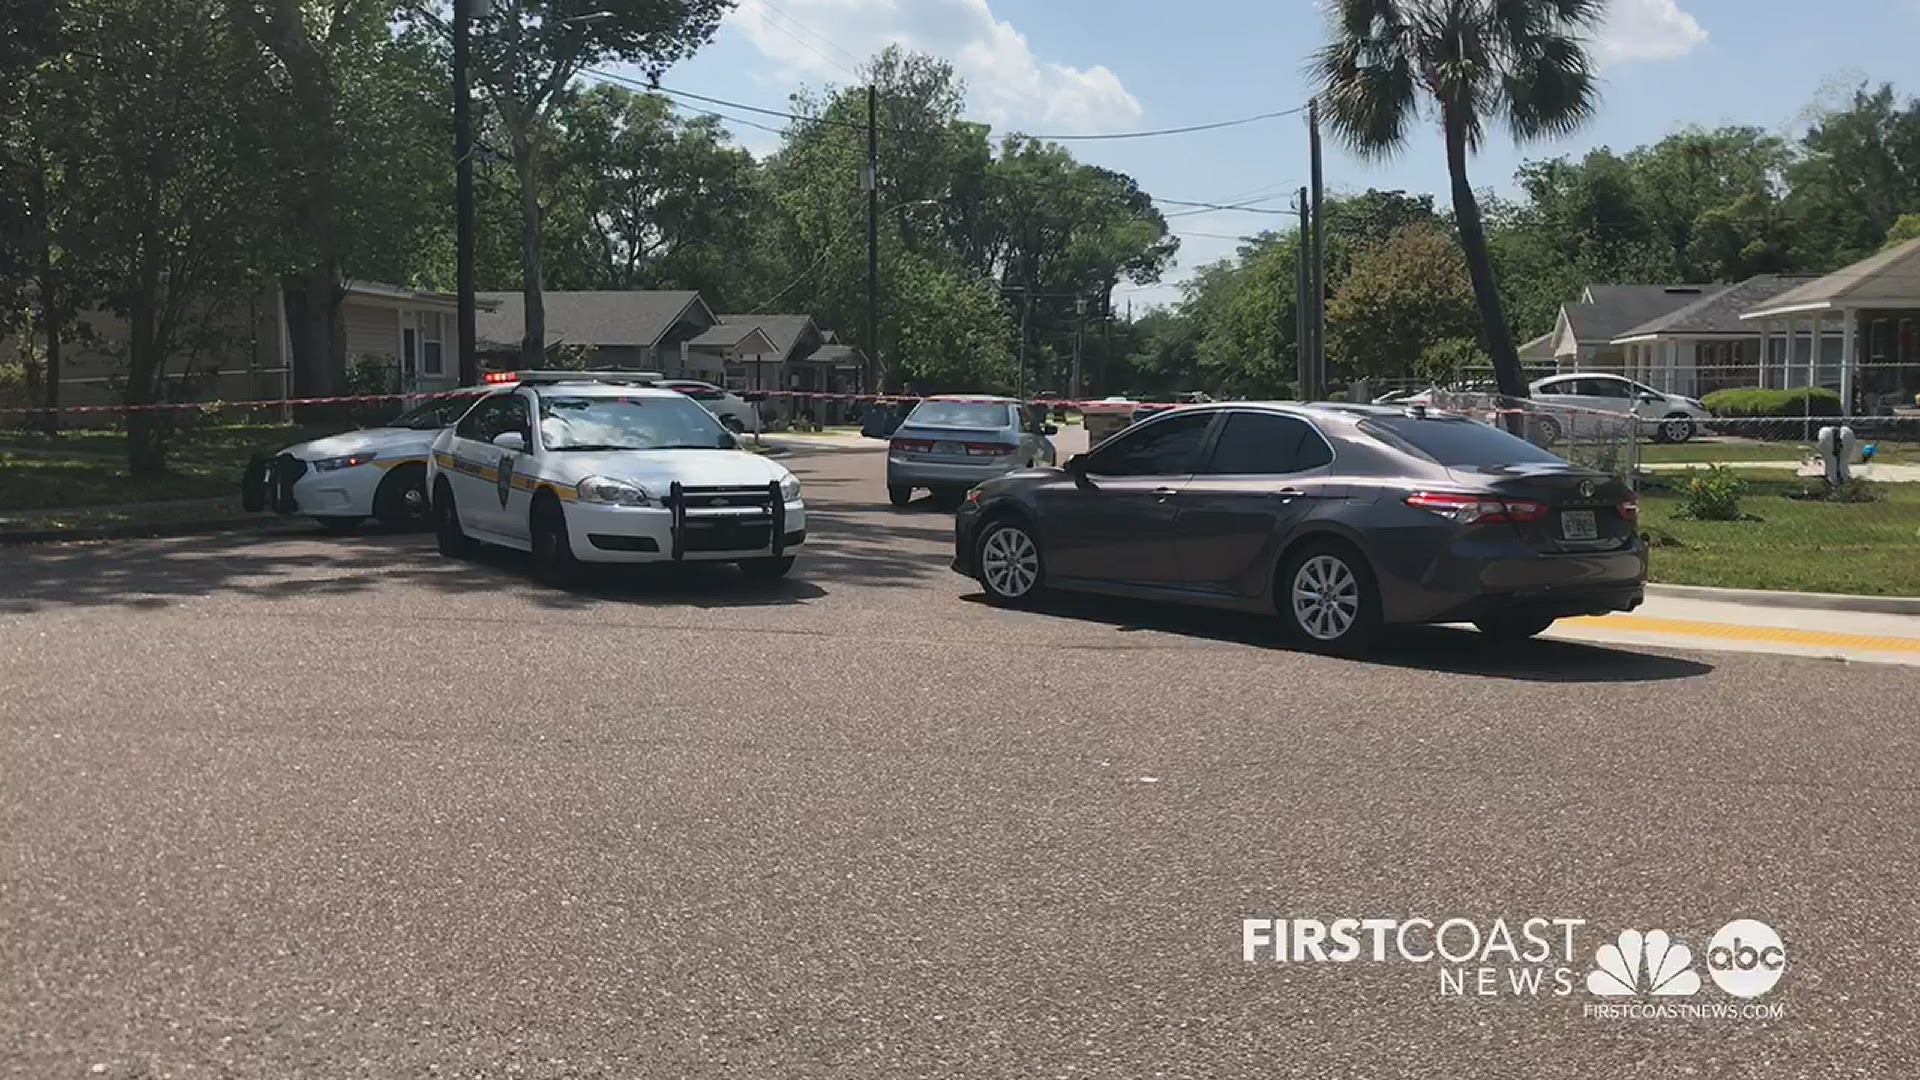 The Jacksonville Sheriff's Office said the shooting happened in the 2100 block of Brooklyn Road.